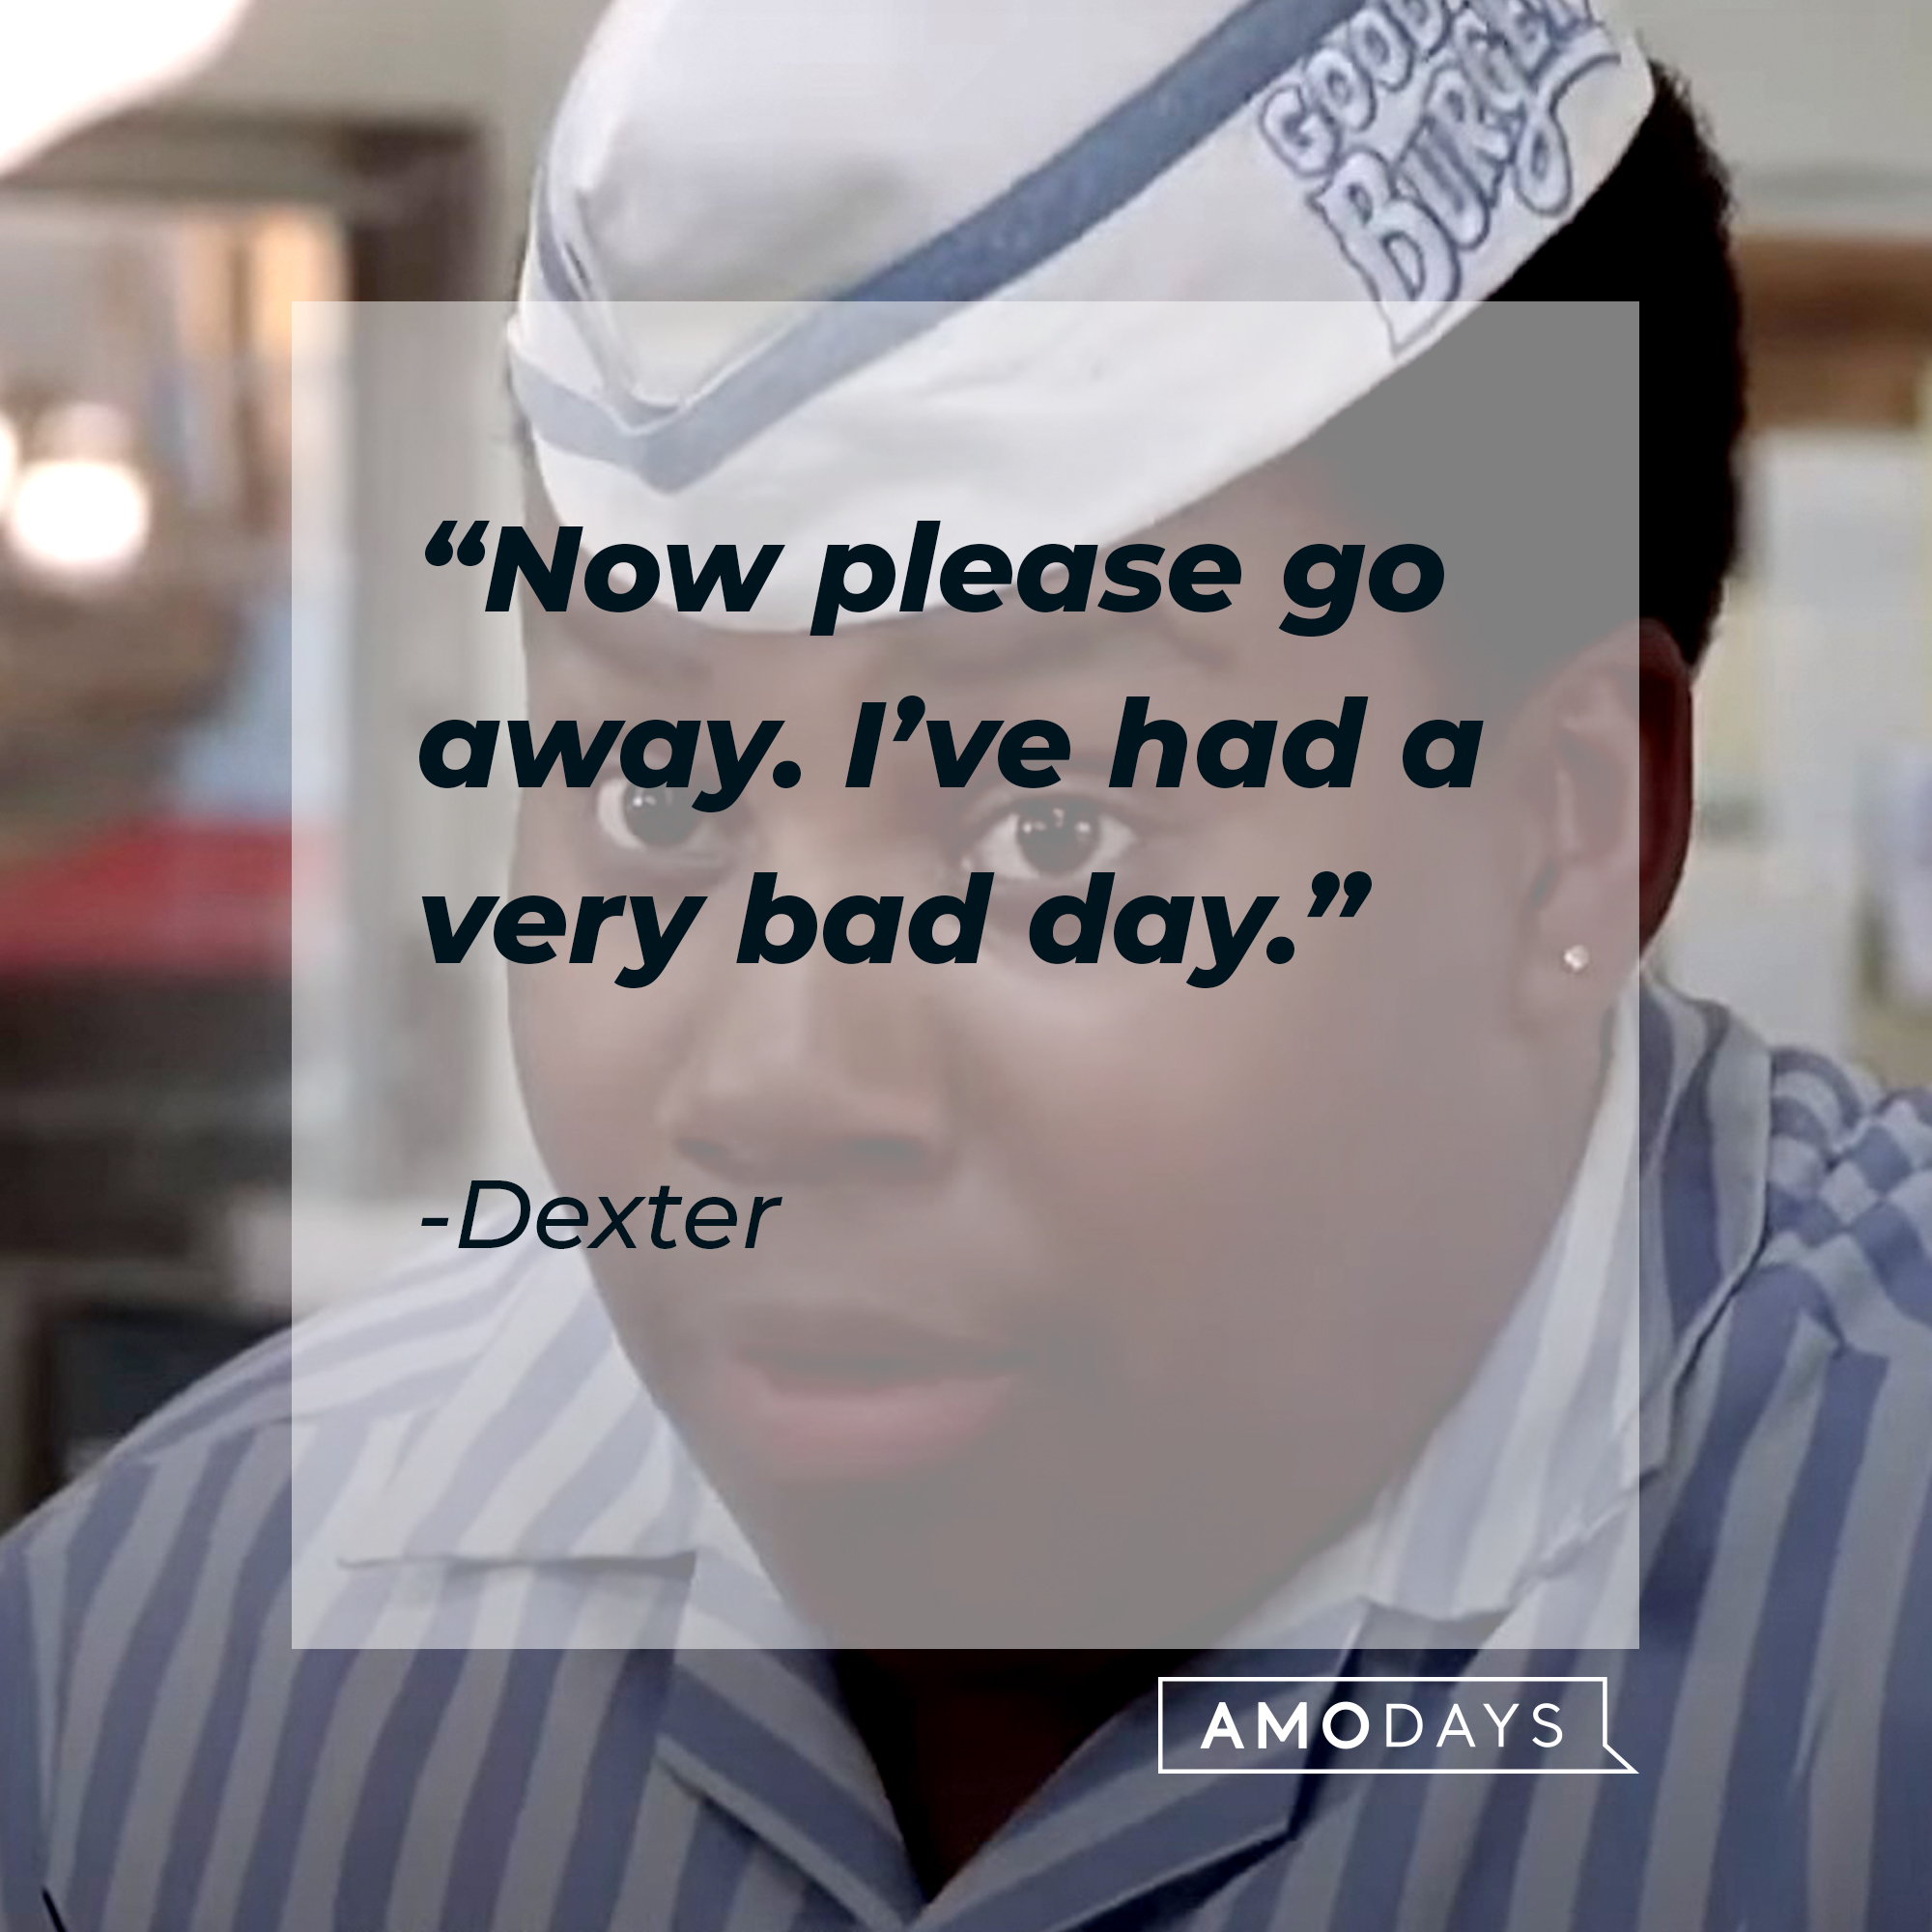 An image of Dexter with his quote: “Now, please go away. I’ve had a very bad day.” | Source: AmoDays